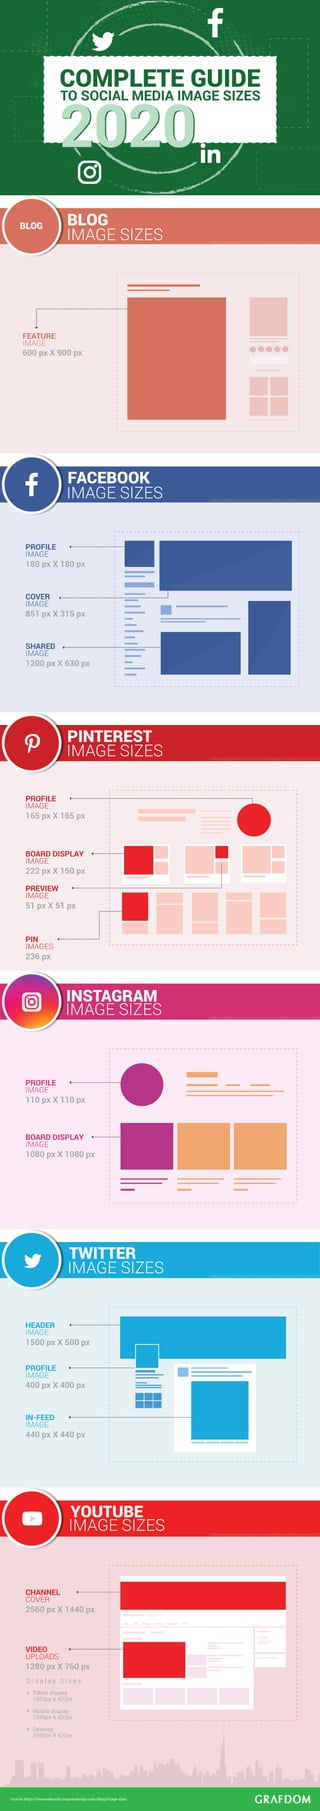  Social Media Image Sizes - Cheat Sheet (2020 Complete Guide)